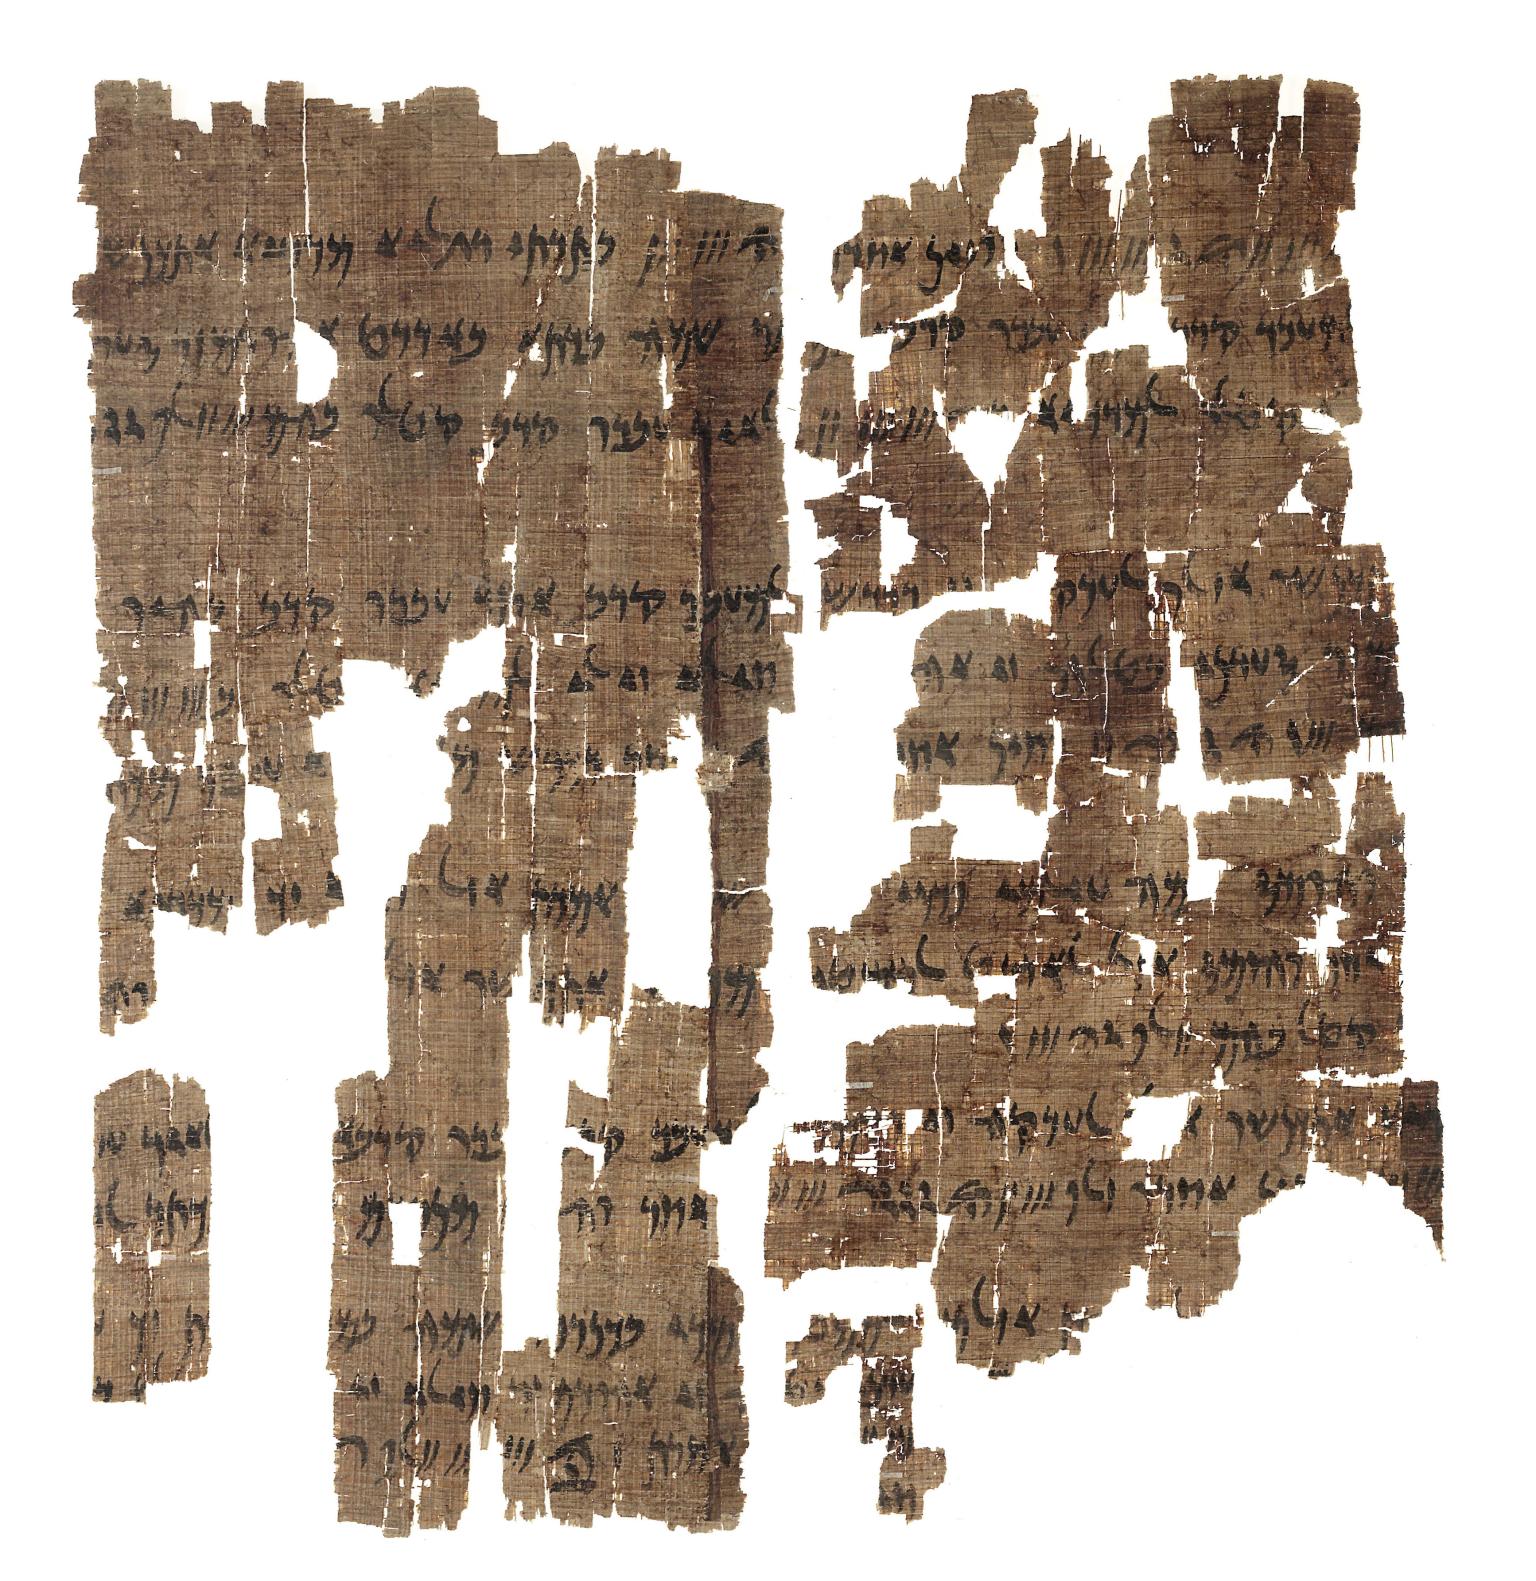 Fragmentary papyrus in several pieces with Aramaic writing. 